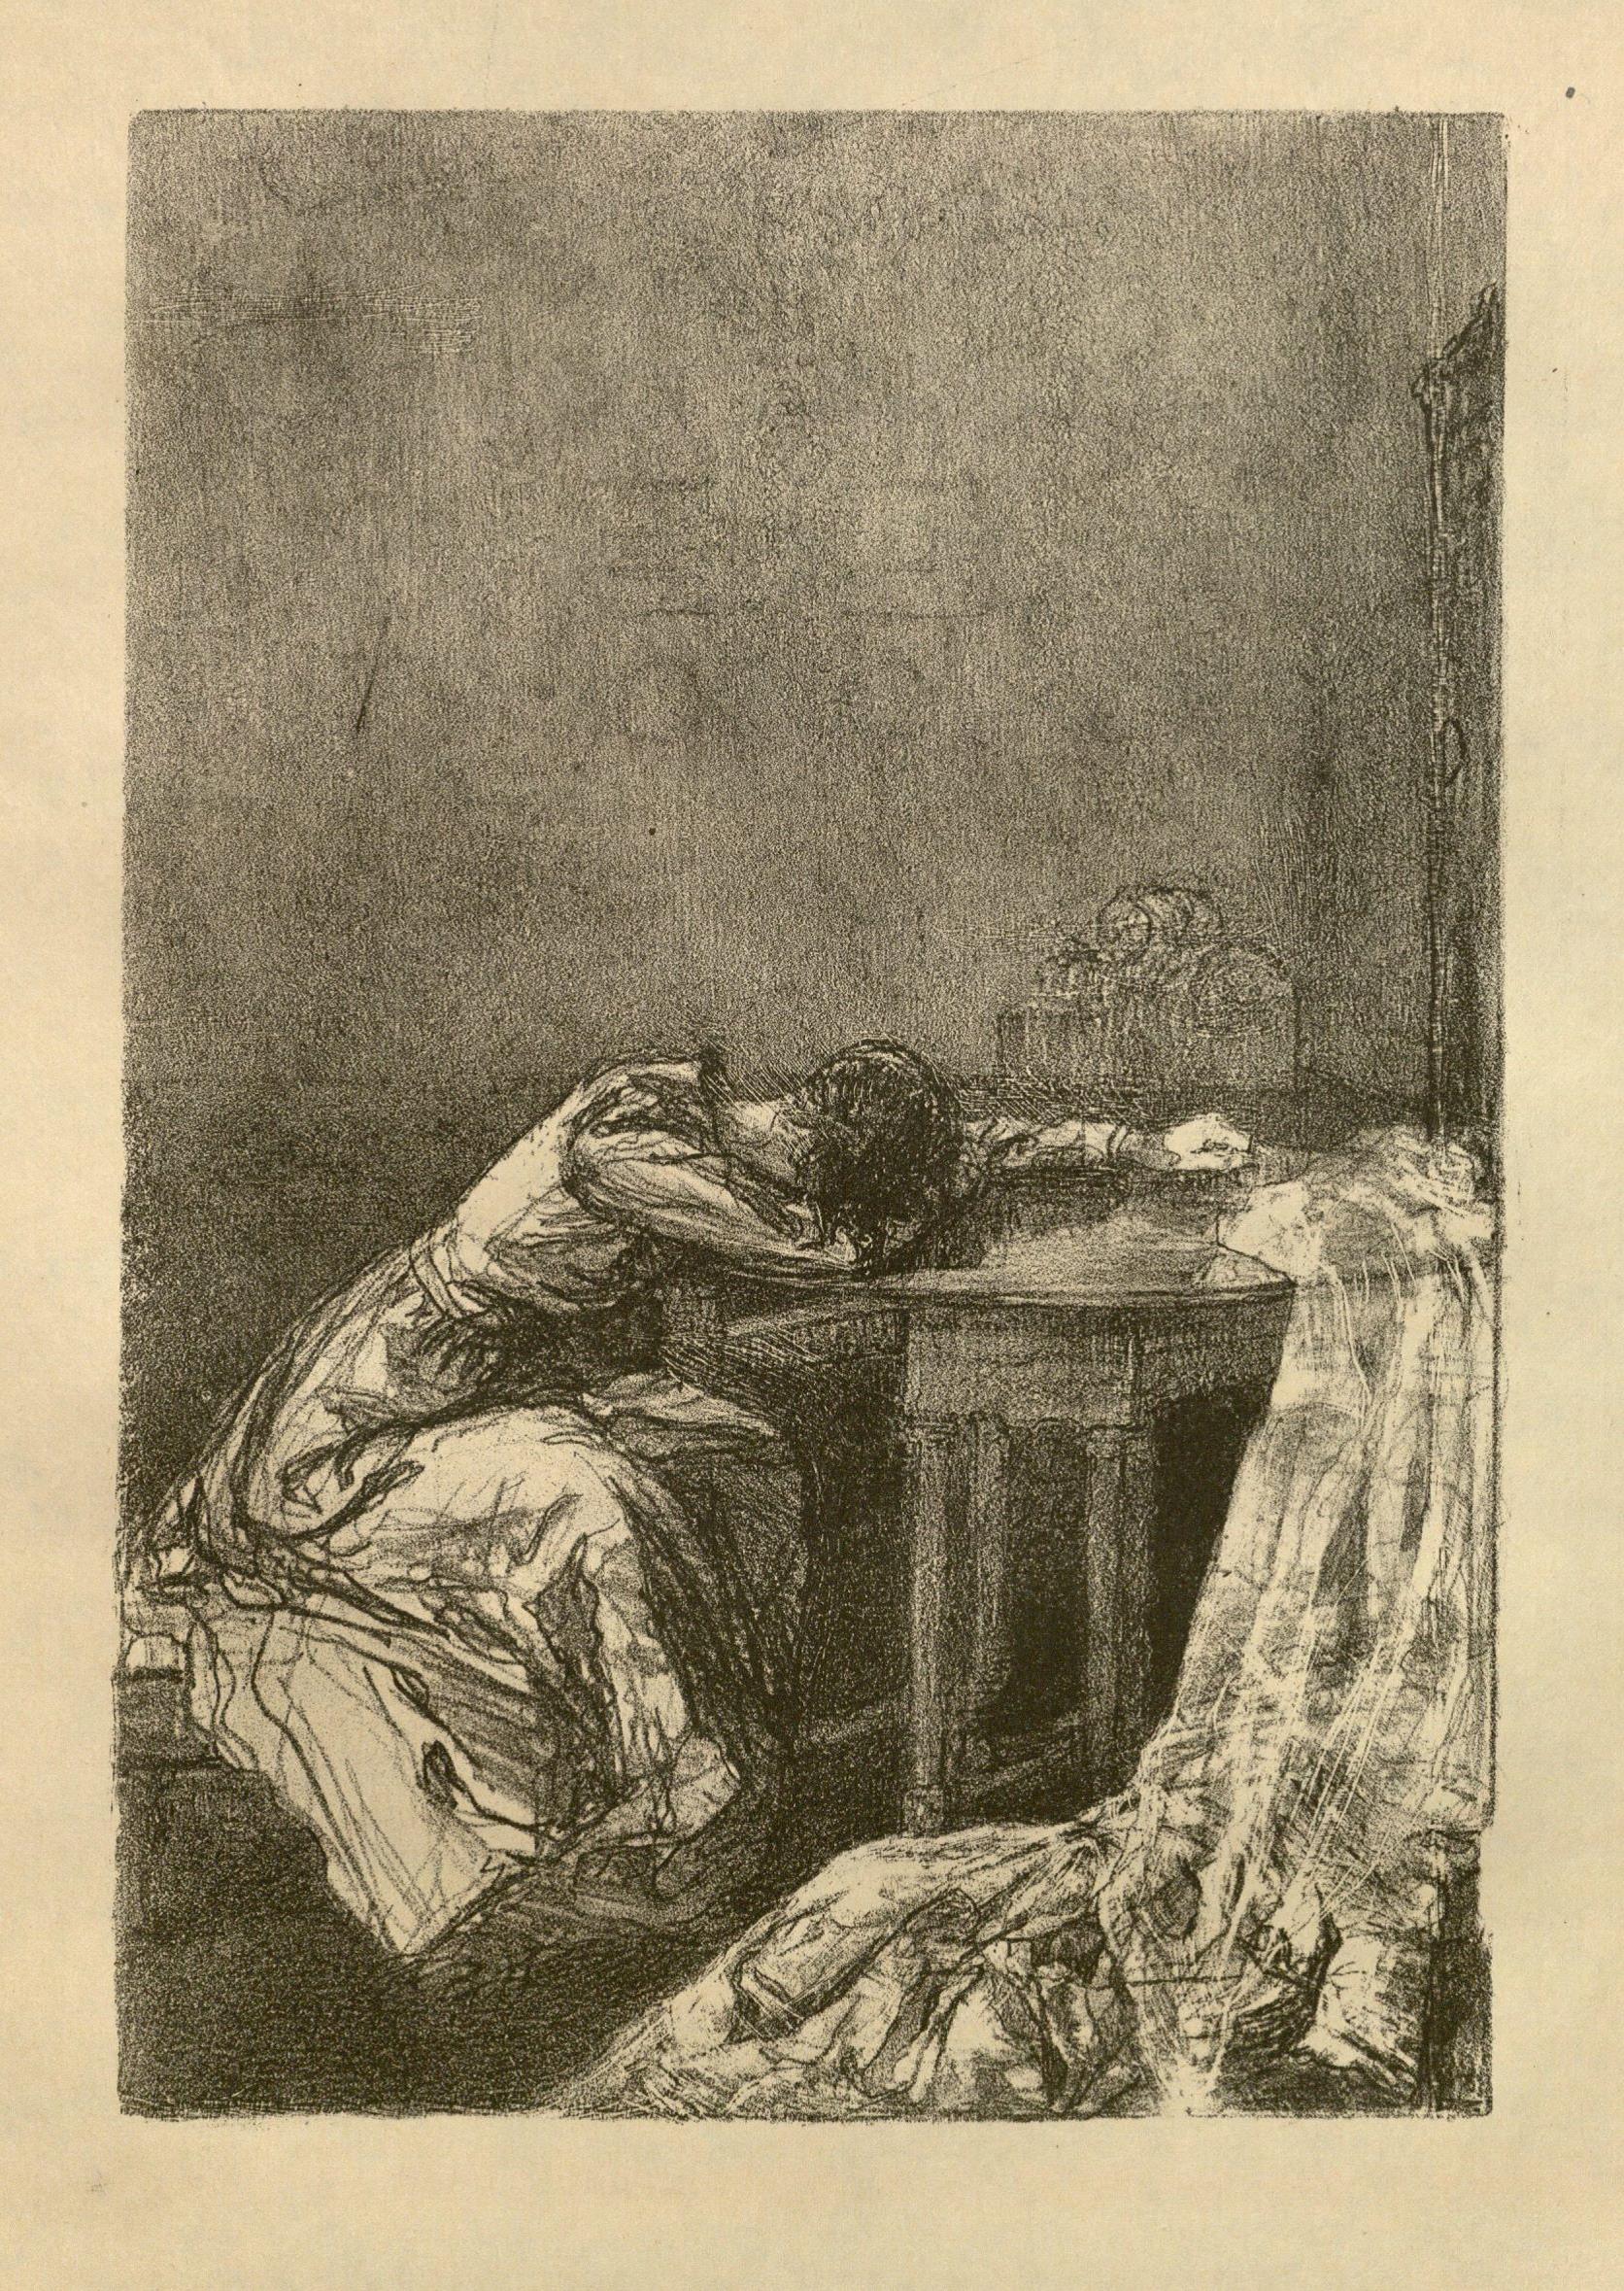 Lithograph by Ethel Gabain from Imprimerie Nationale’s 1923 edition of Jane Eyre. This illustration depicts Jane weeping over her wedding dress after discovering that her groom, Mr. Rochester, was already married. 